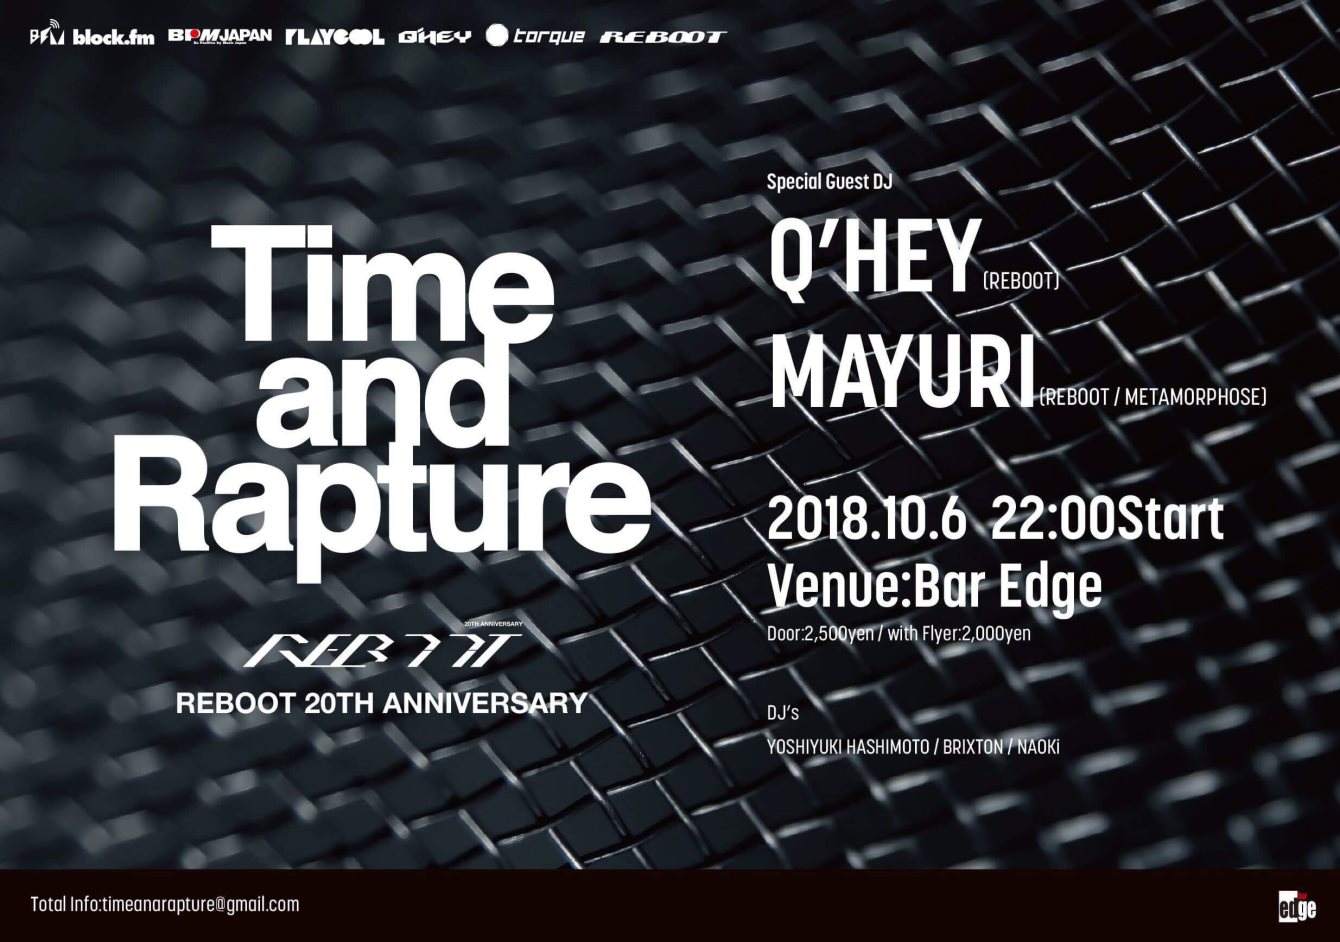 Time and Rapture - Reboot 20th Anniversary Tour in Hiroshima - Página frontal